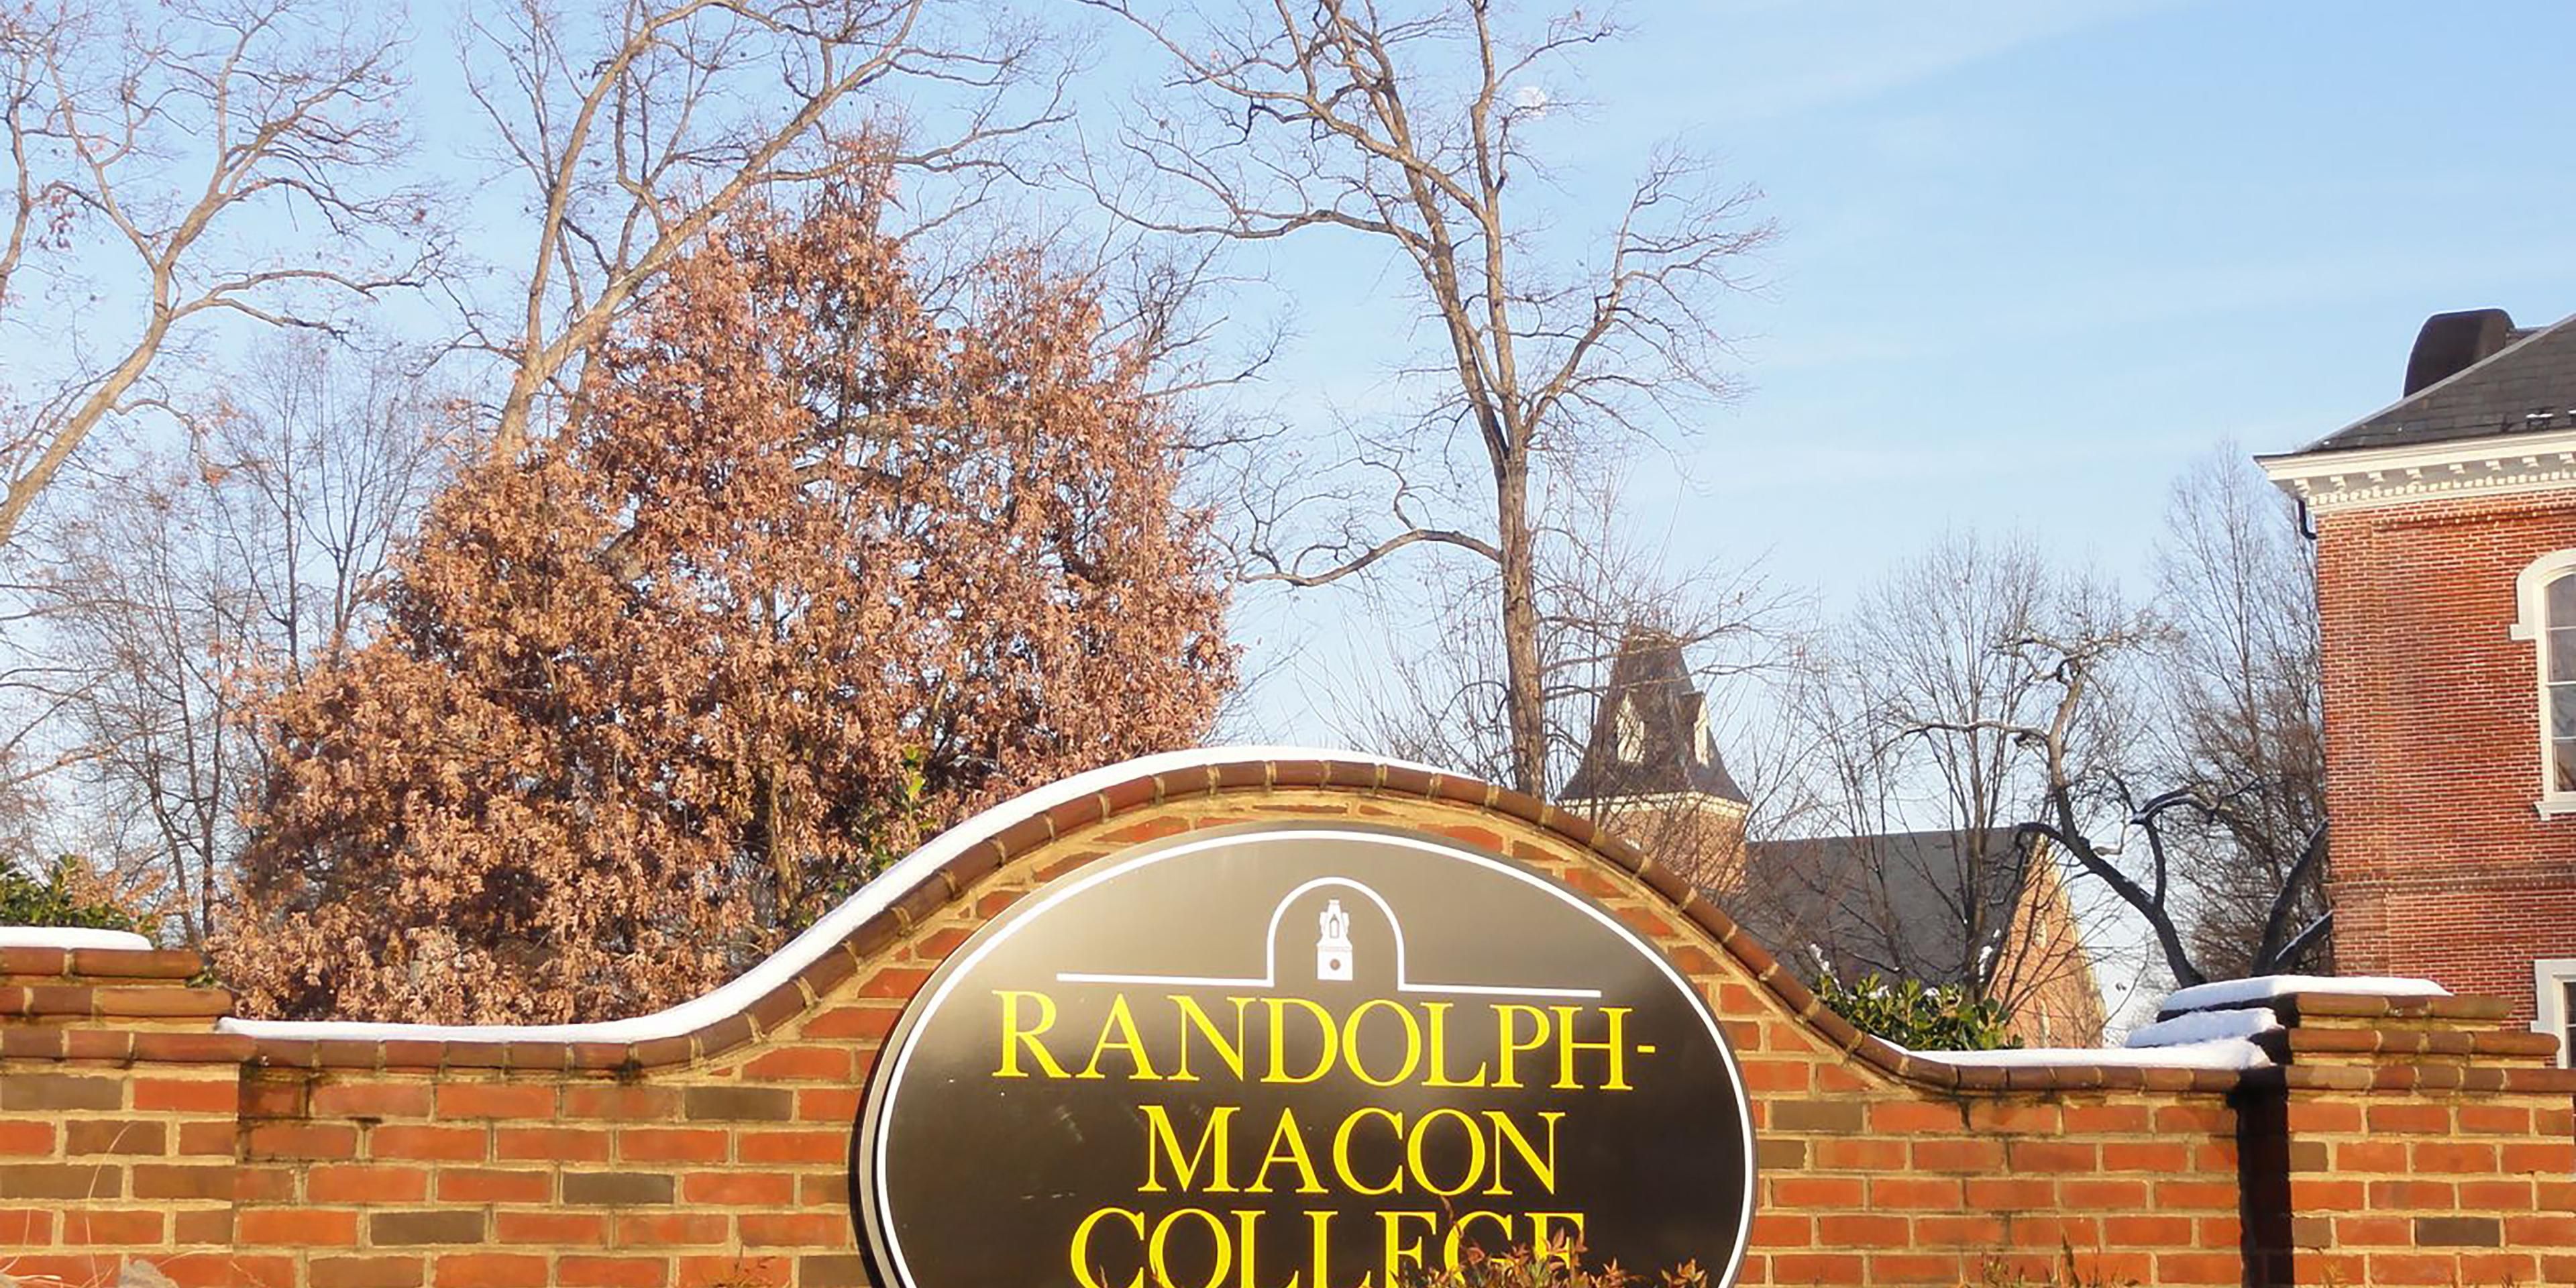 Our beautiful hotel is located just 2.0 miles away from Randolph Macon - If you're looking for a great place for a great experience while visiting the college then we're ready to welcome you! Go Hornets!